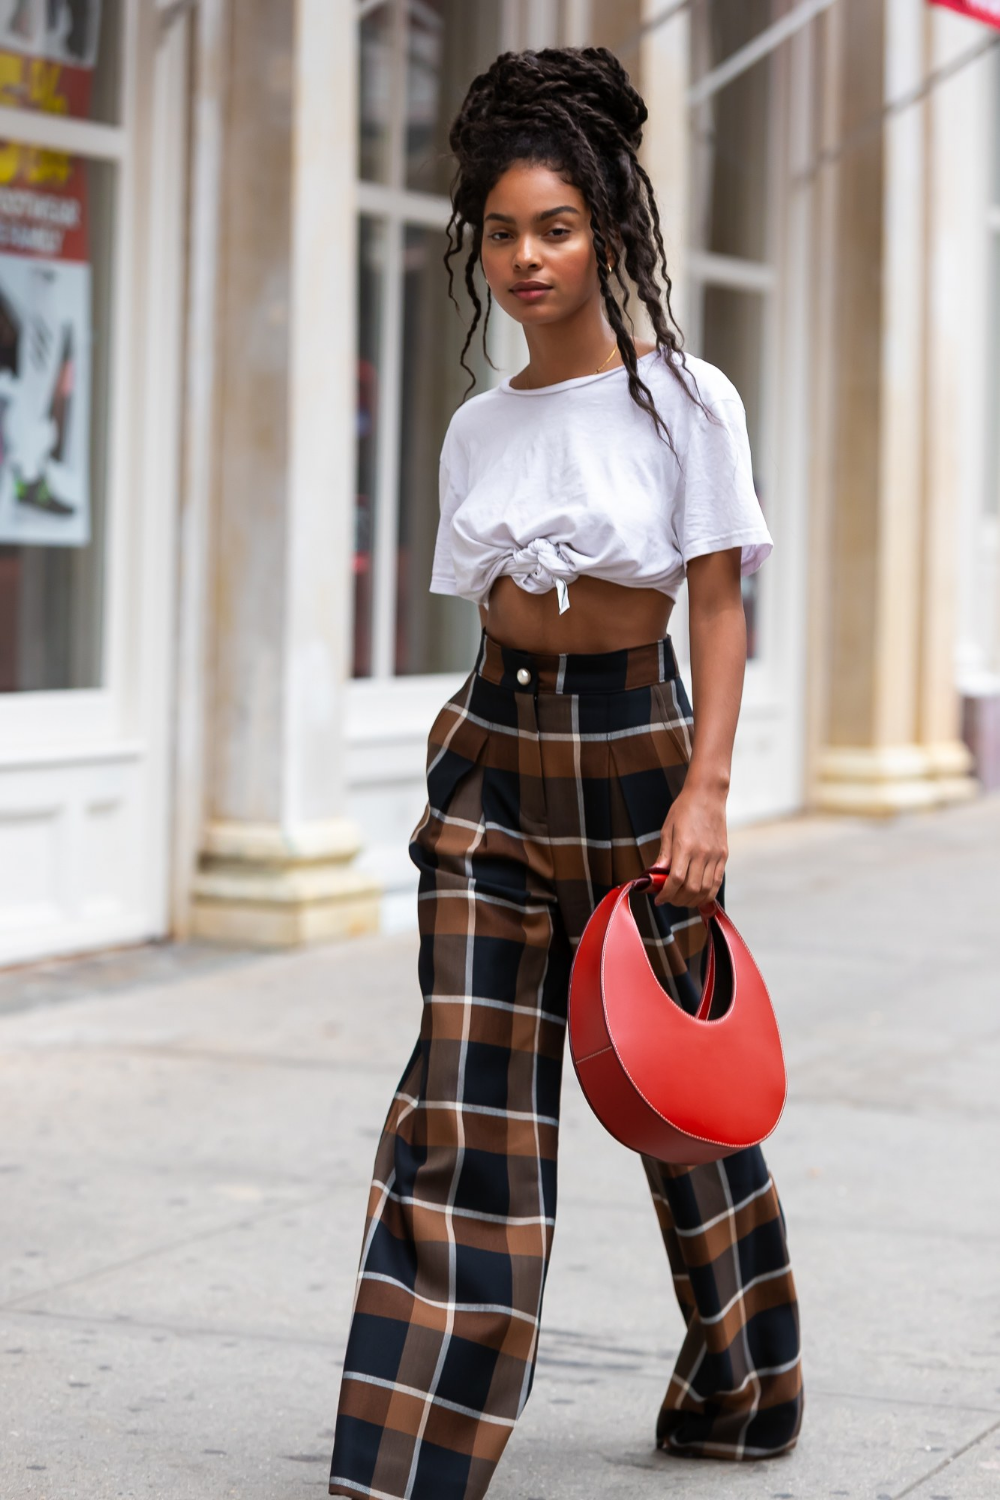 The Most Colorful (And Diverse) NYFW Street Style You've Been Waiting for - The Most Colorful (And Diverse) NYFW Street Style You've Been Waiting for -   18 style Fashion 2019 ideas